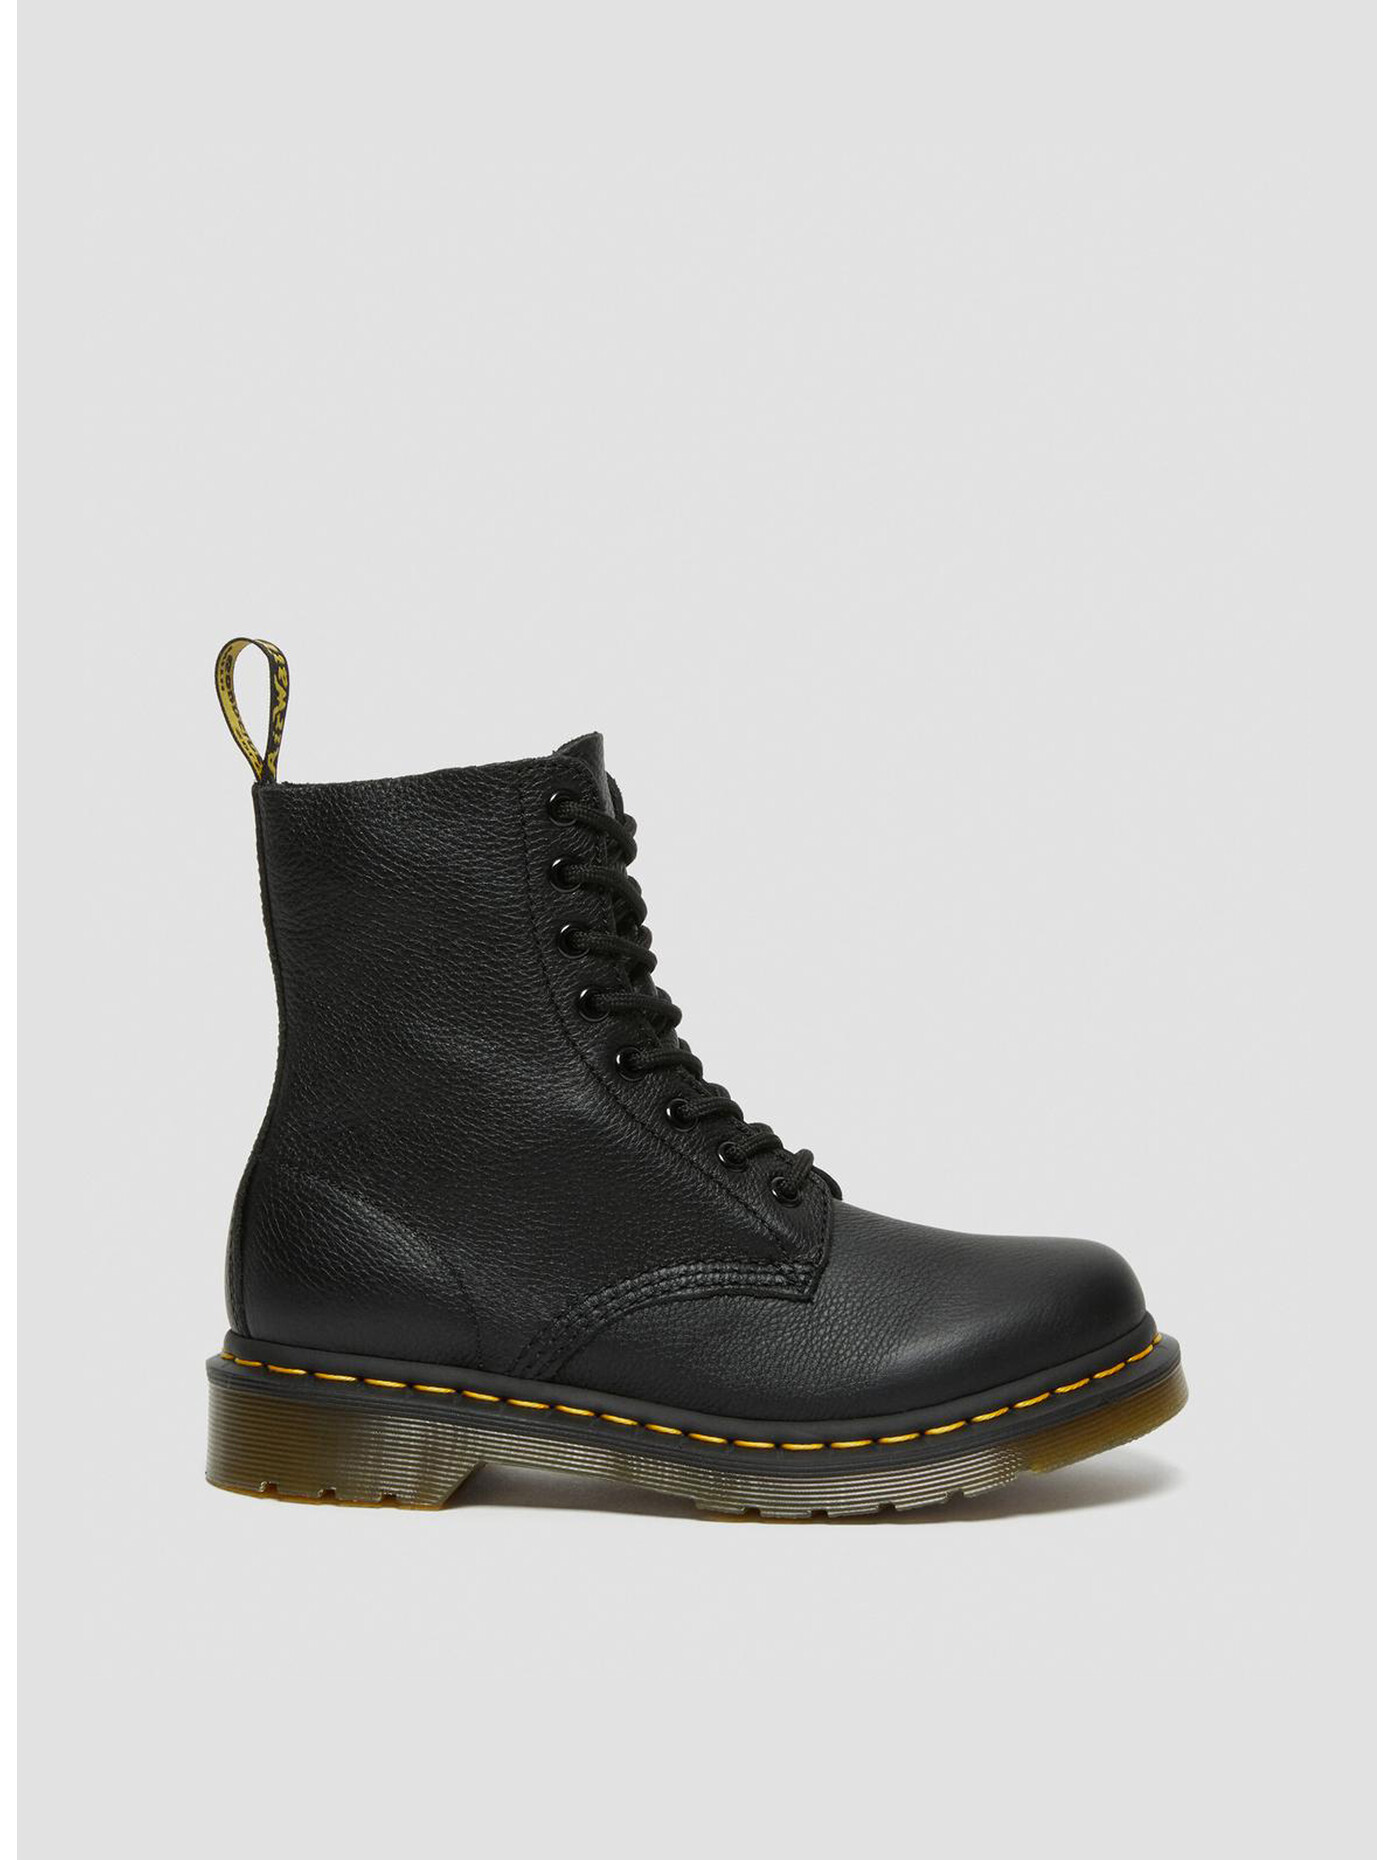 dr. martens stivali 1460 in pelle pascal virginia, donna